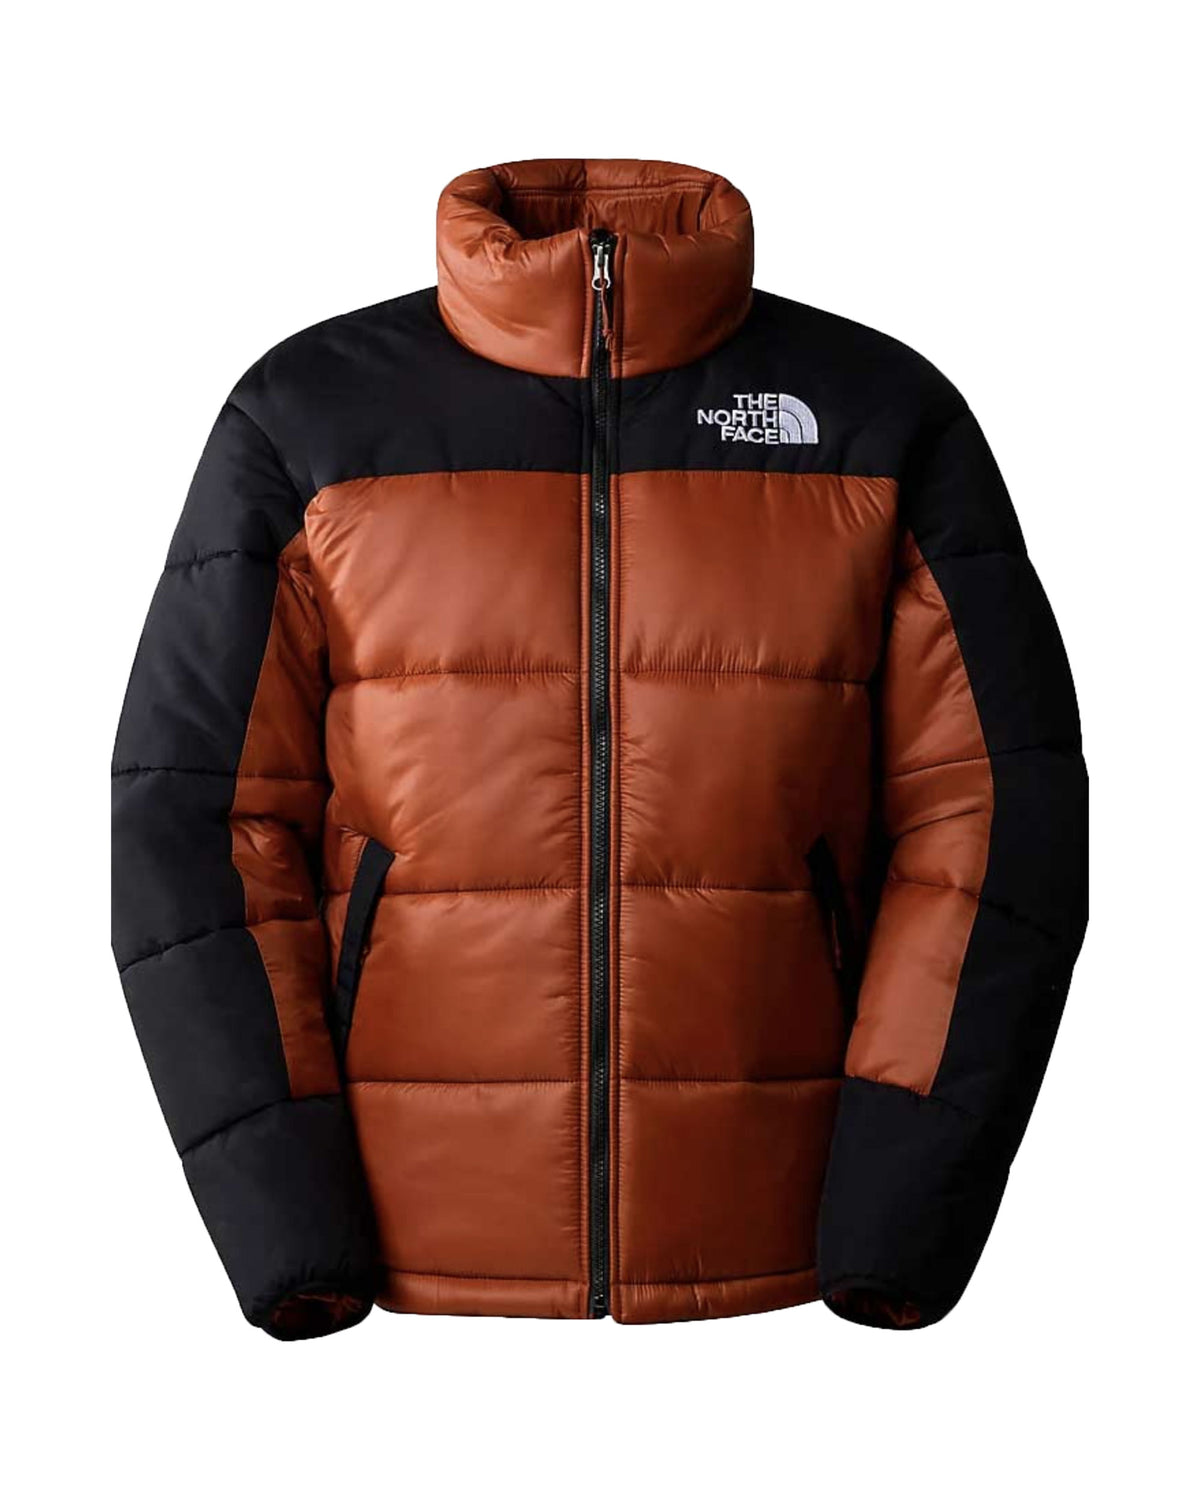 Man Jacket The North Face Himalayan Insulated Jacket Brandybn